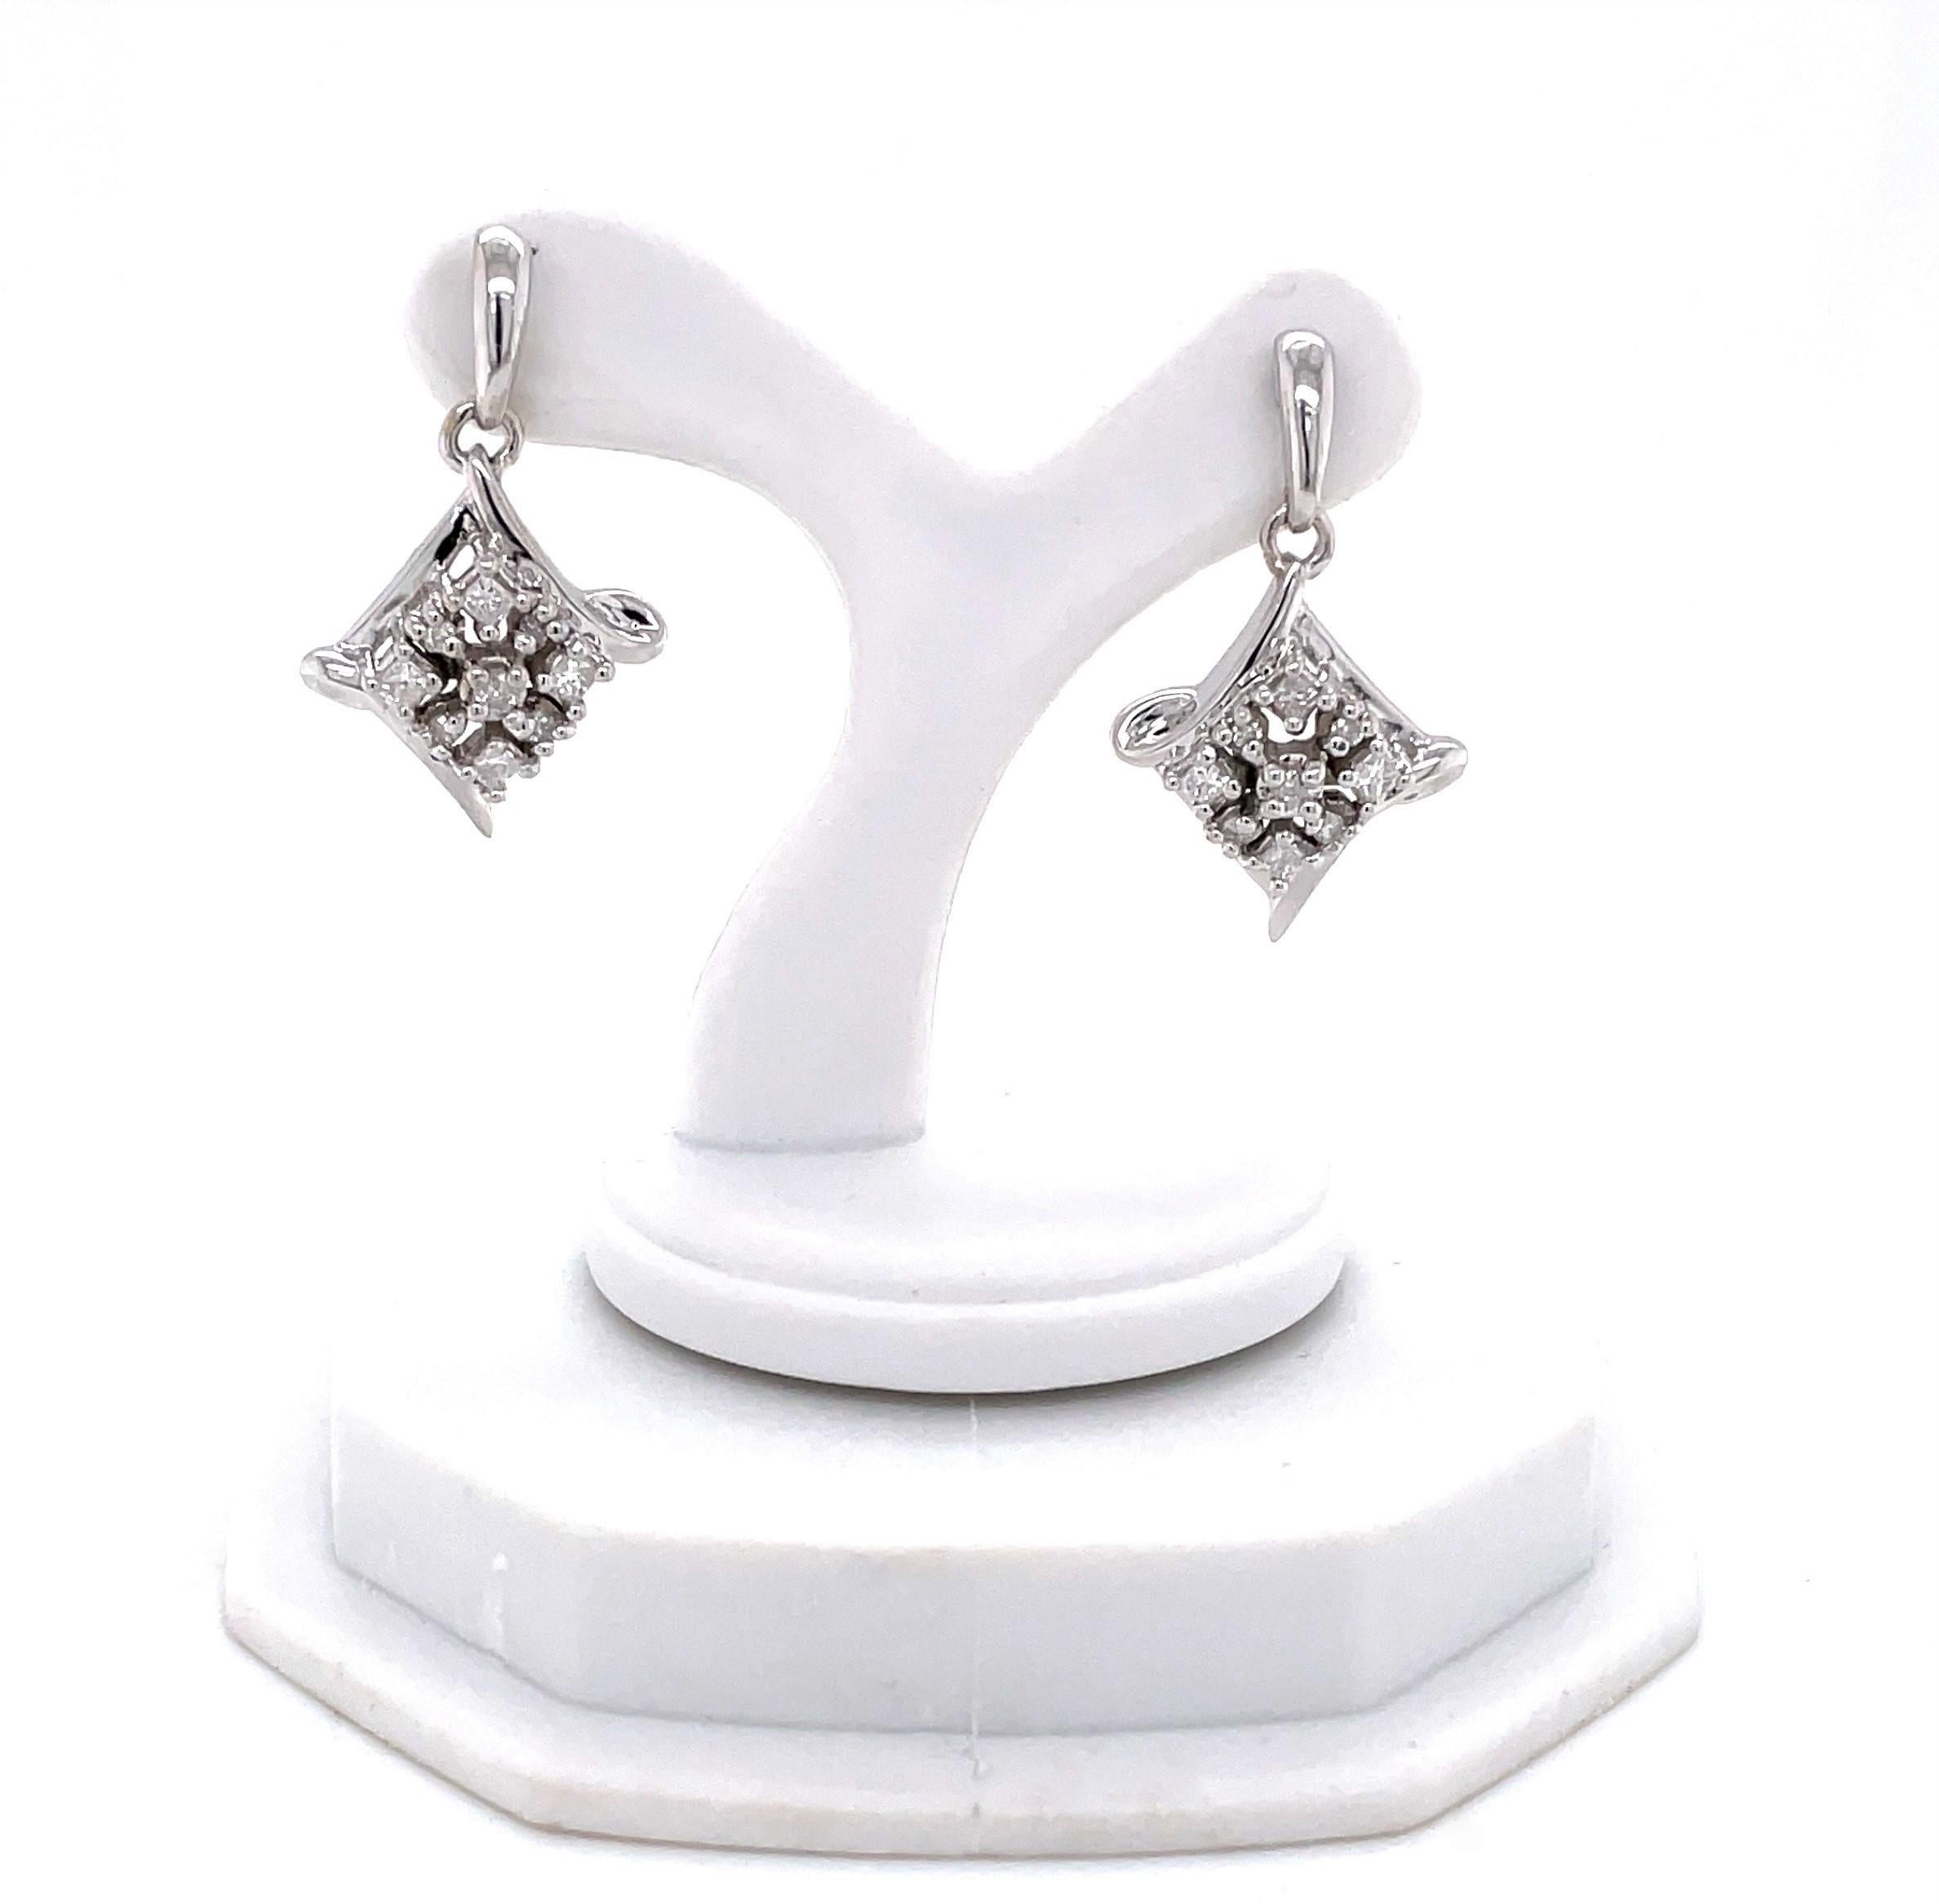 Fab earring pair with plenty of contemporary style and flair sparkling with eighteen diamond accents, .18 carats total weight. For pieced ears, the whimsical marquis shaped fourteen karat 14K white gold drop is approximately 7/8 inch in length. Gift